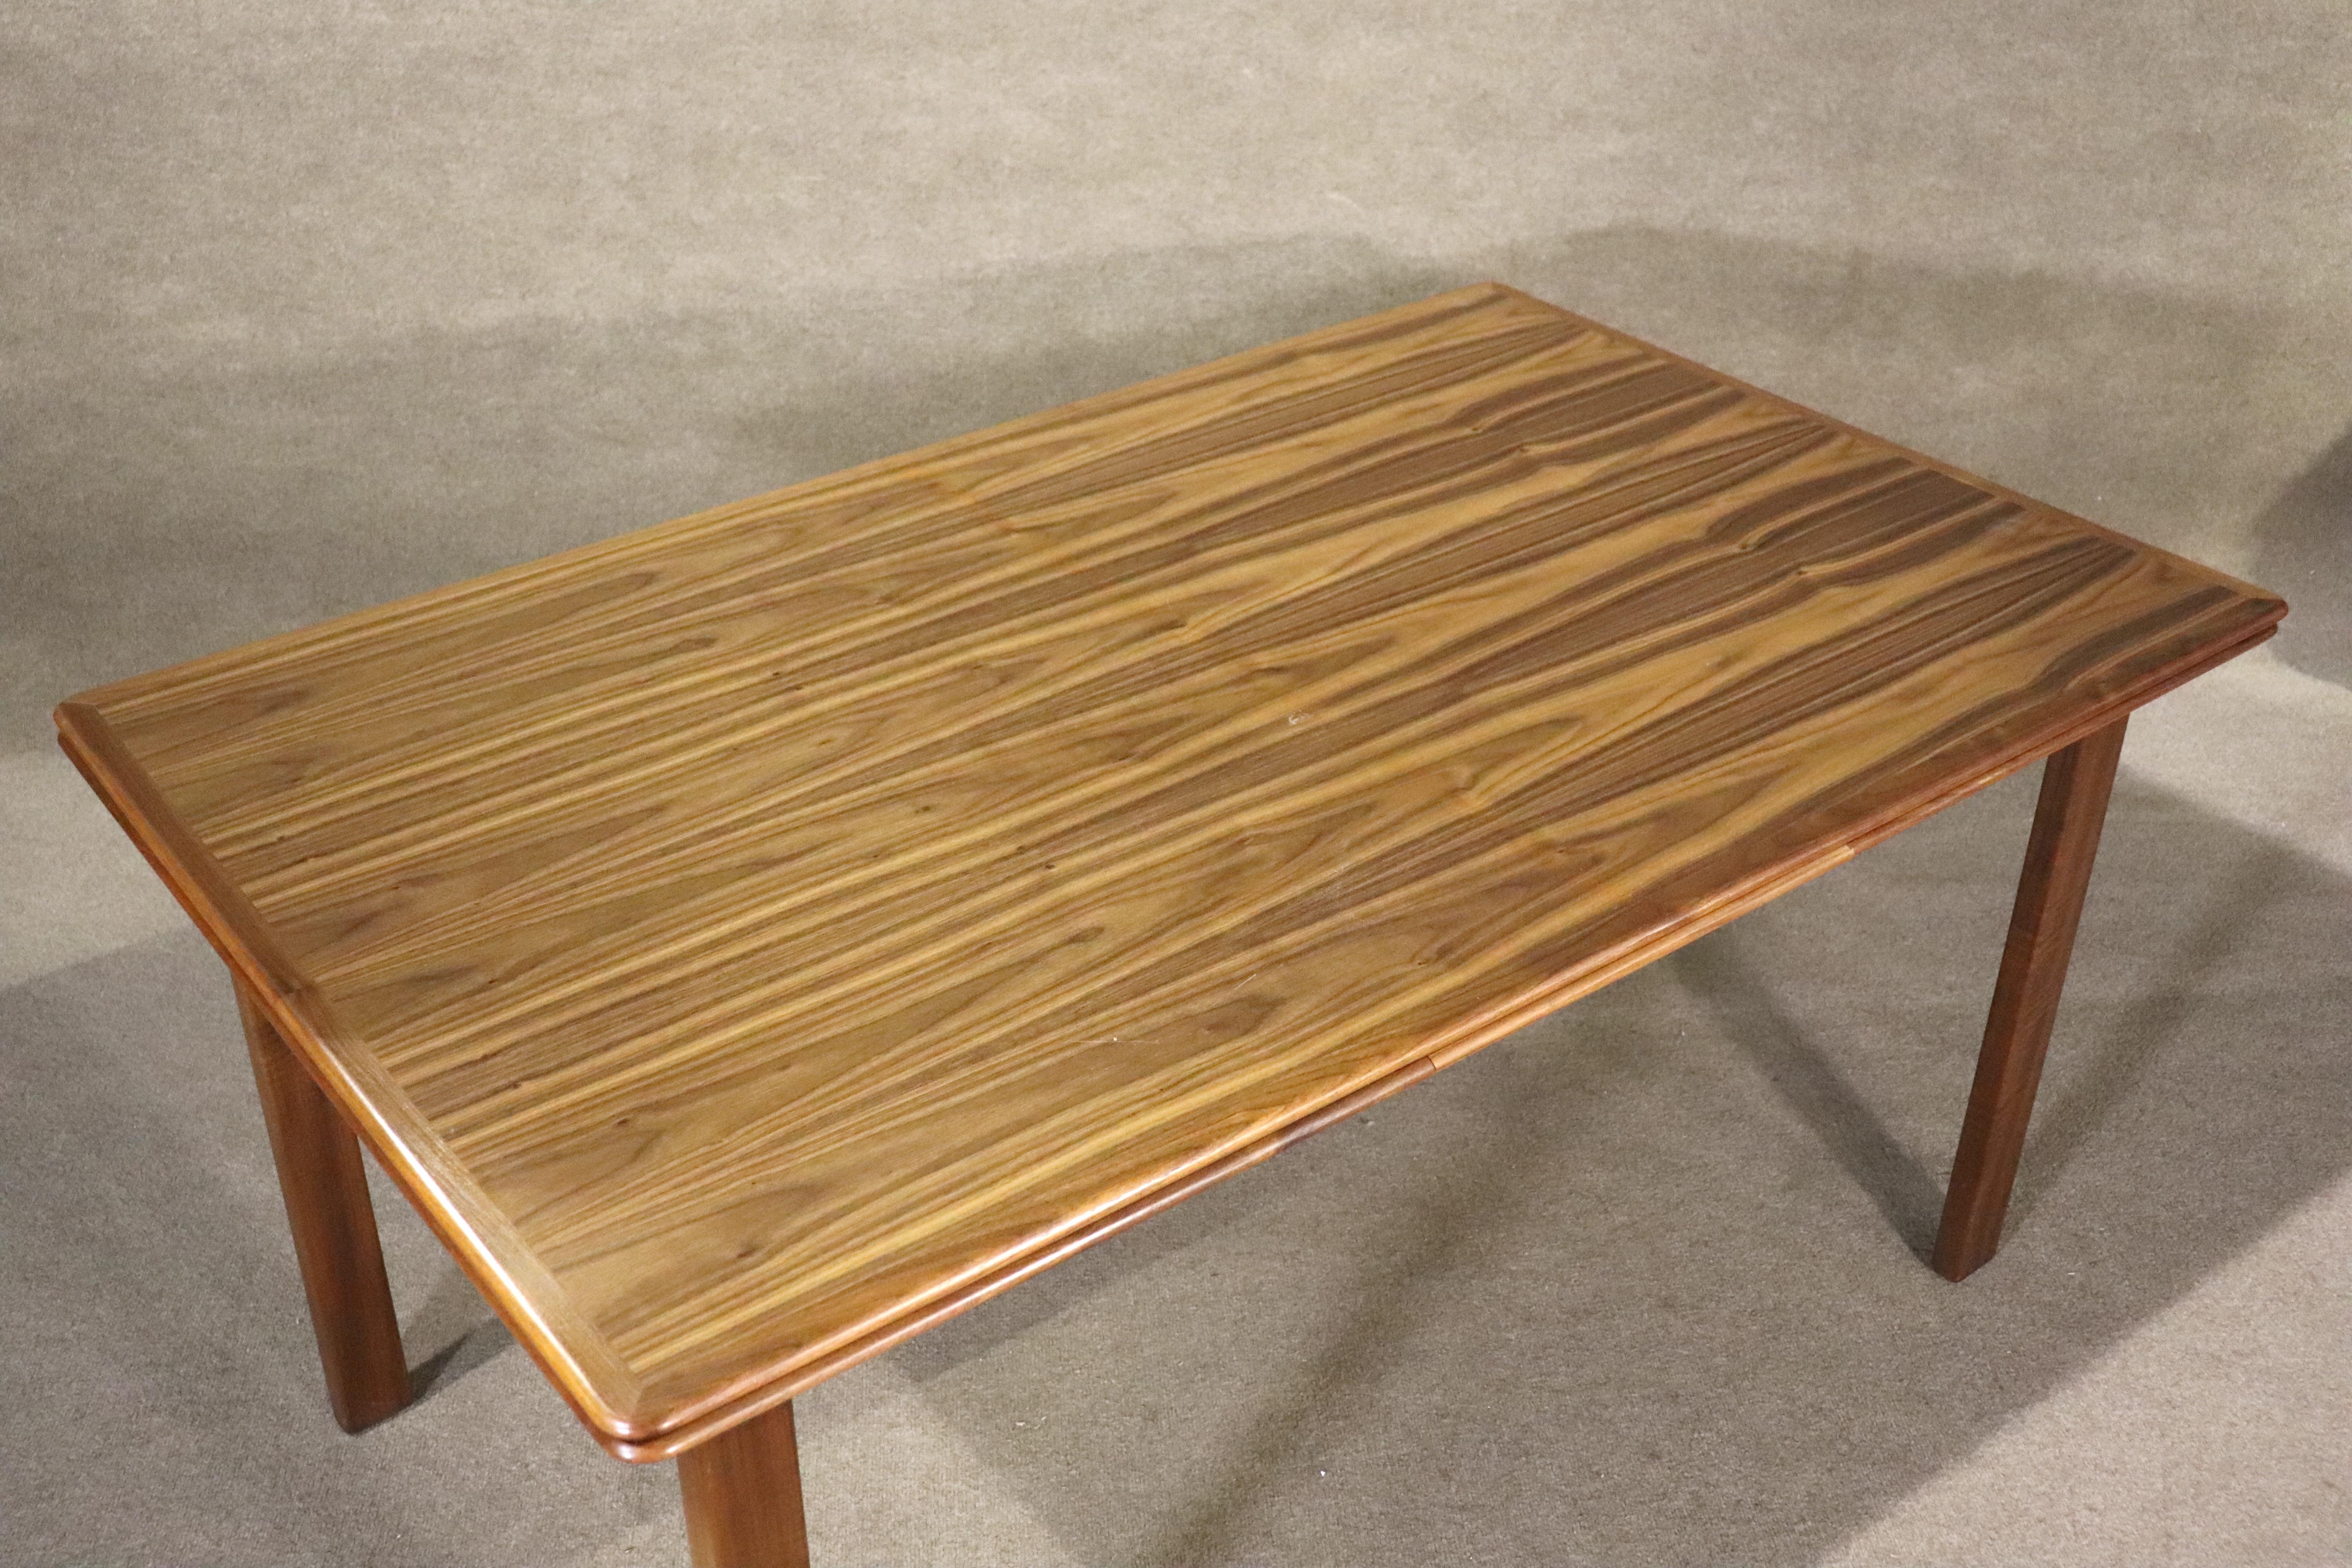 Danish made mid-century modern dining table with 21 3/4